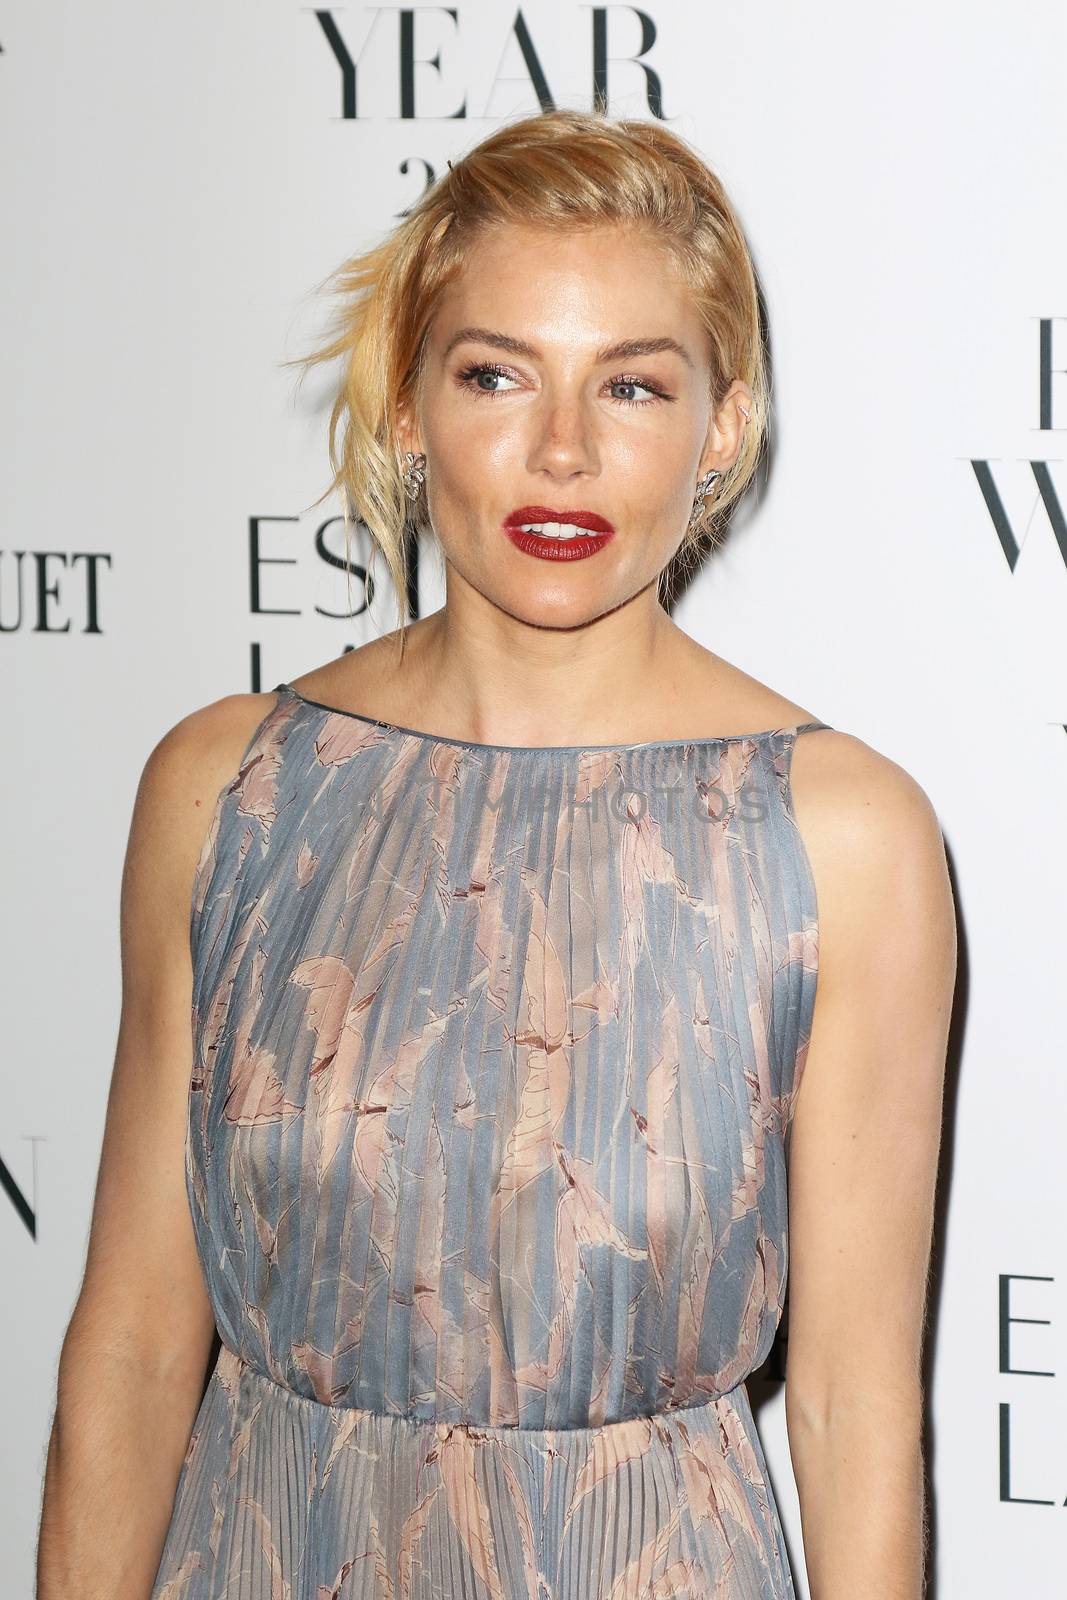 UNITED KINGDOM, London: Sienna Miller poses during the Harper's Bazaar Women of the Year Awards at Claridge's, in London, on November 3, 2015.